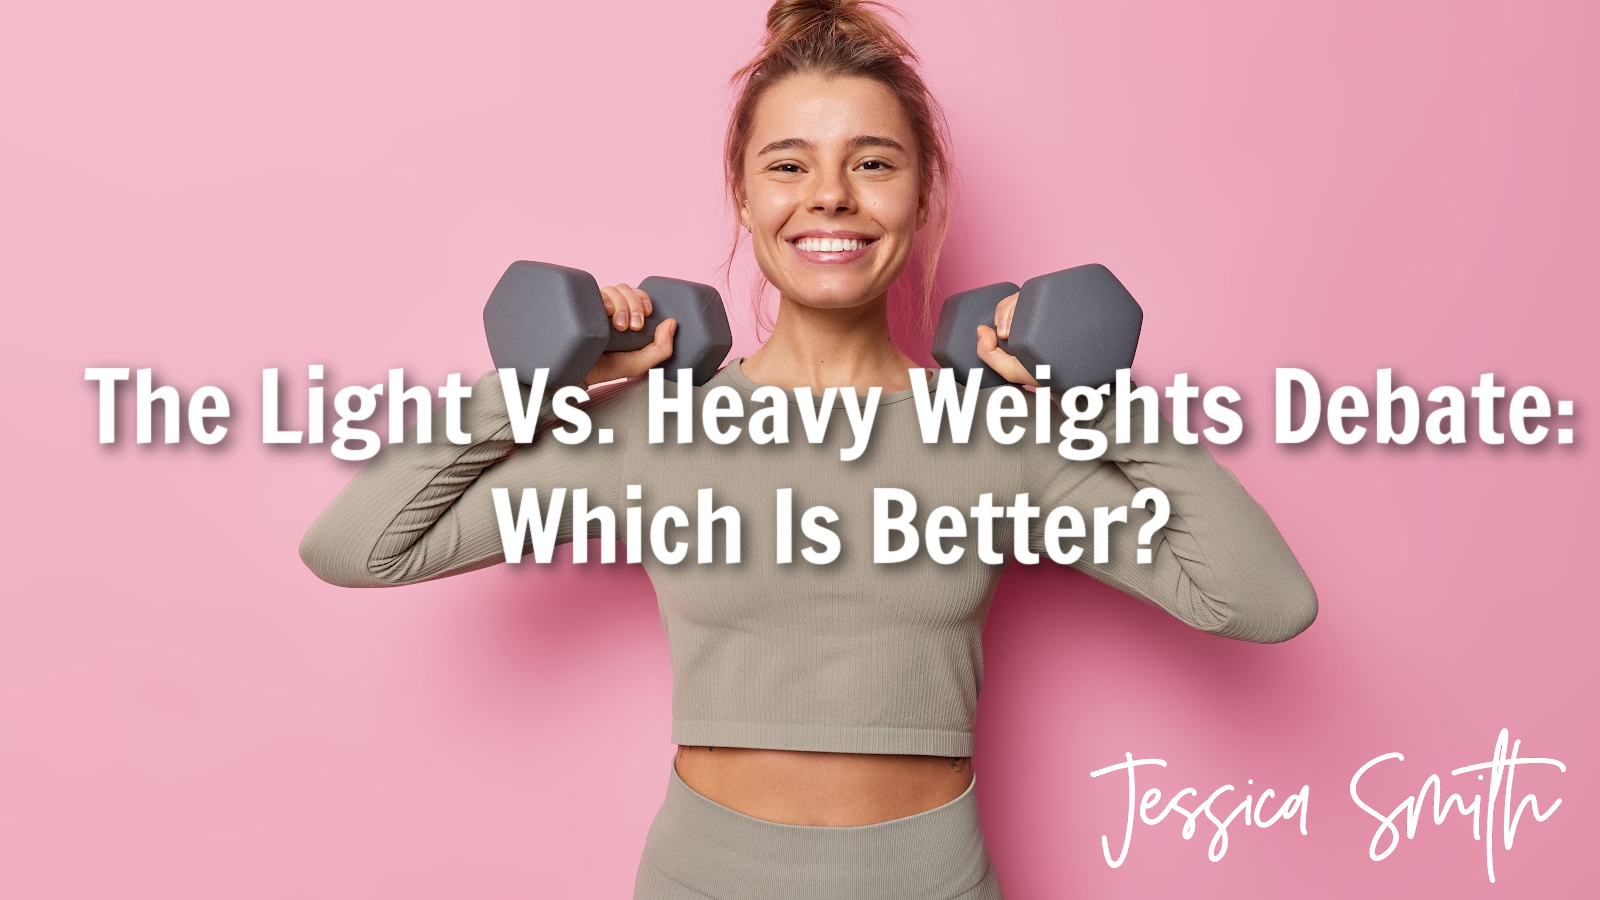 The Light vs. Heavy Weights Debate: Which Is Better?